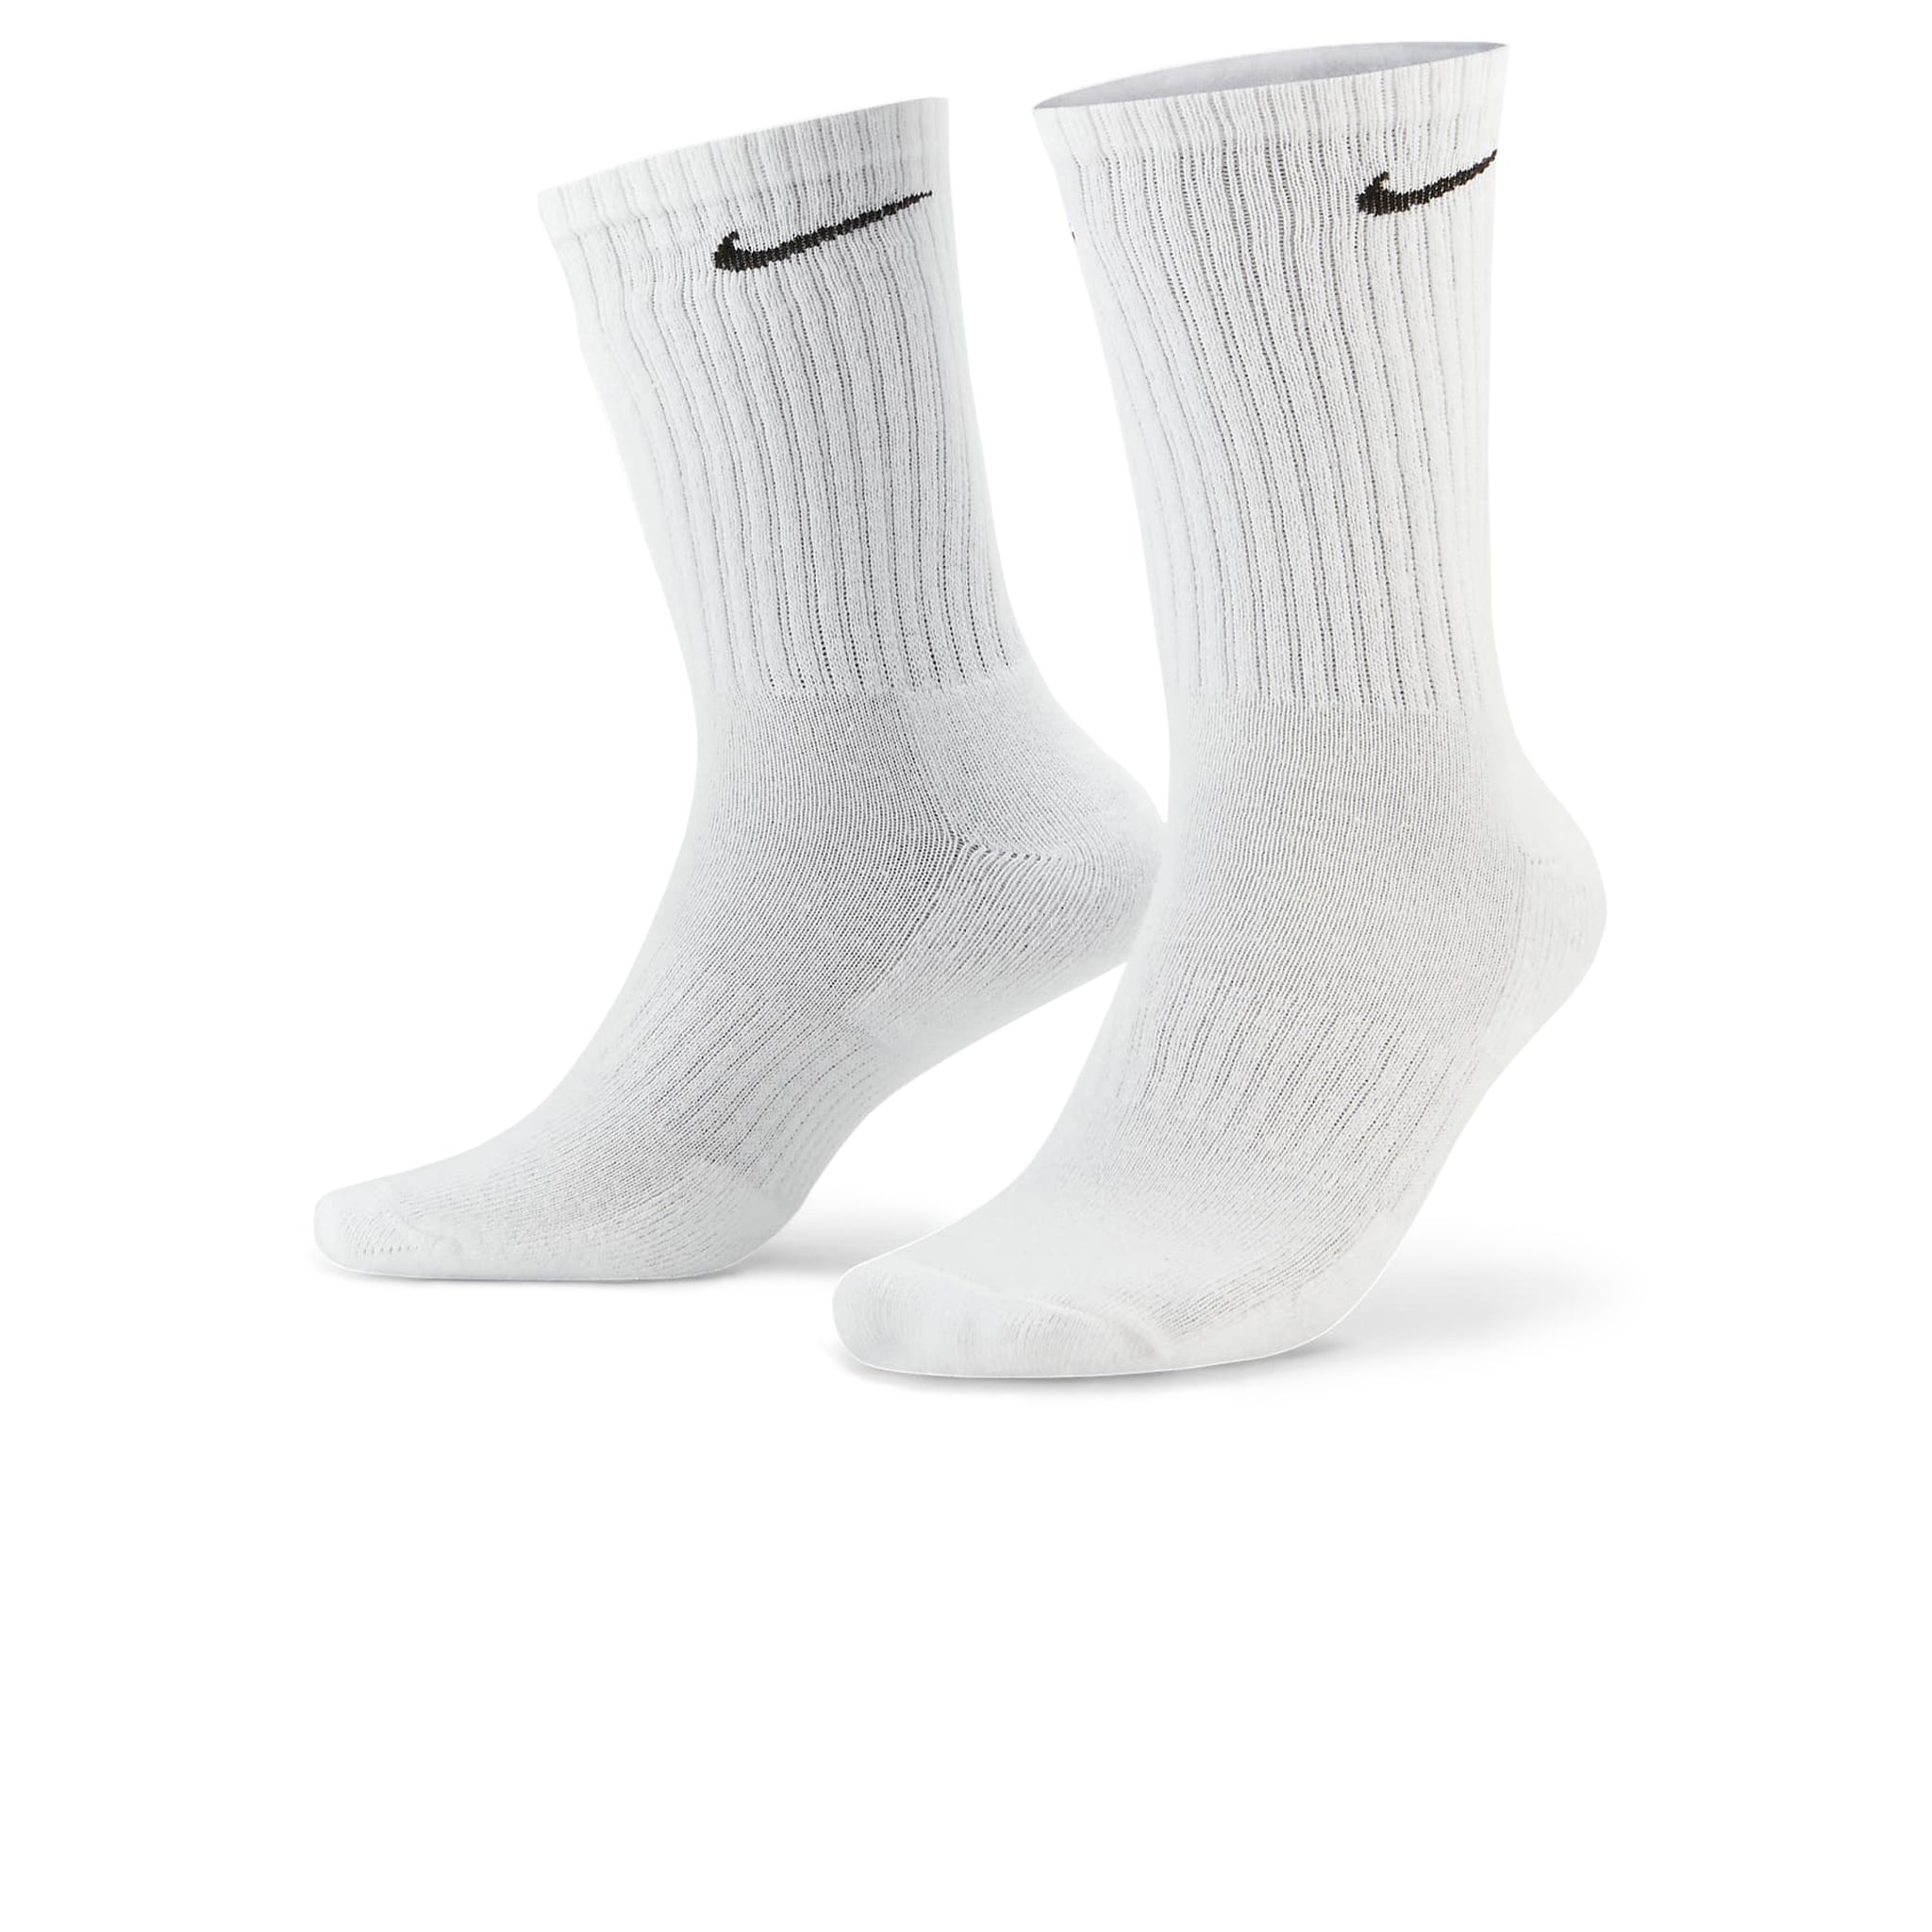 Nike Everyday Cushioned Training Multi Crew Socks 3Pairs Cheap Witzenberg Jordan outlet Front 5f64bc4c f0ef 46d2 a93b d0d441dff27c